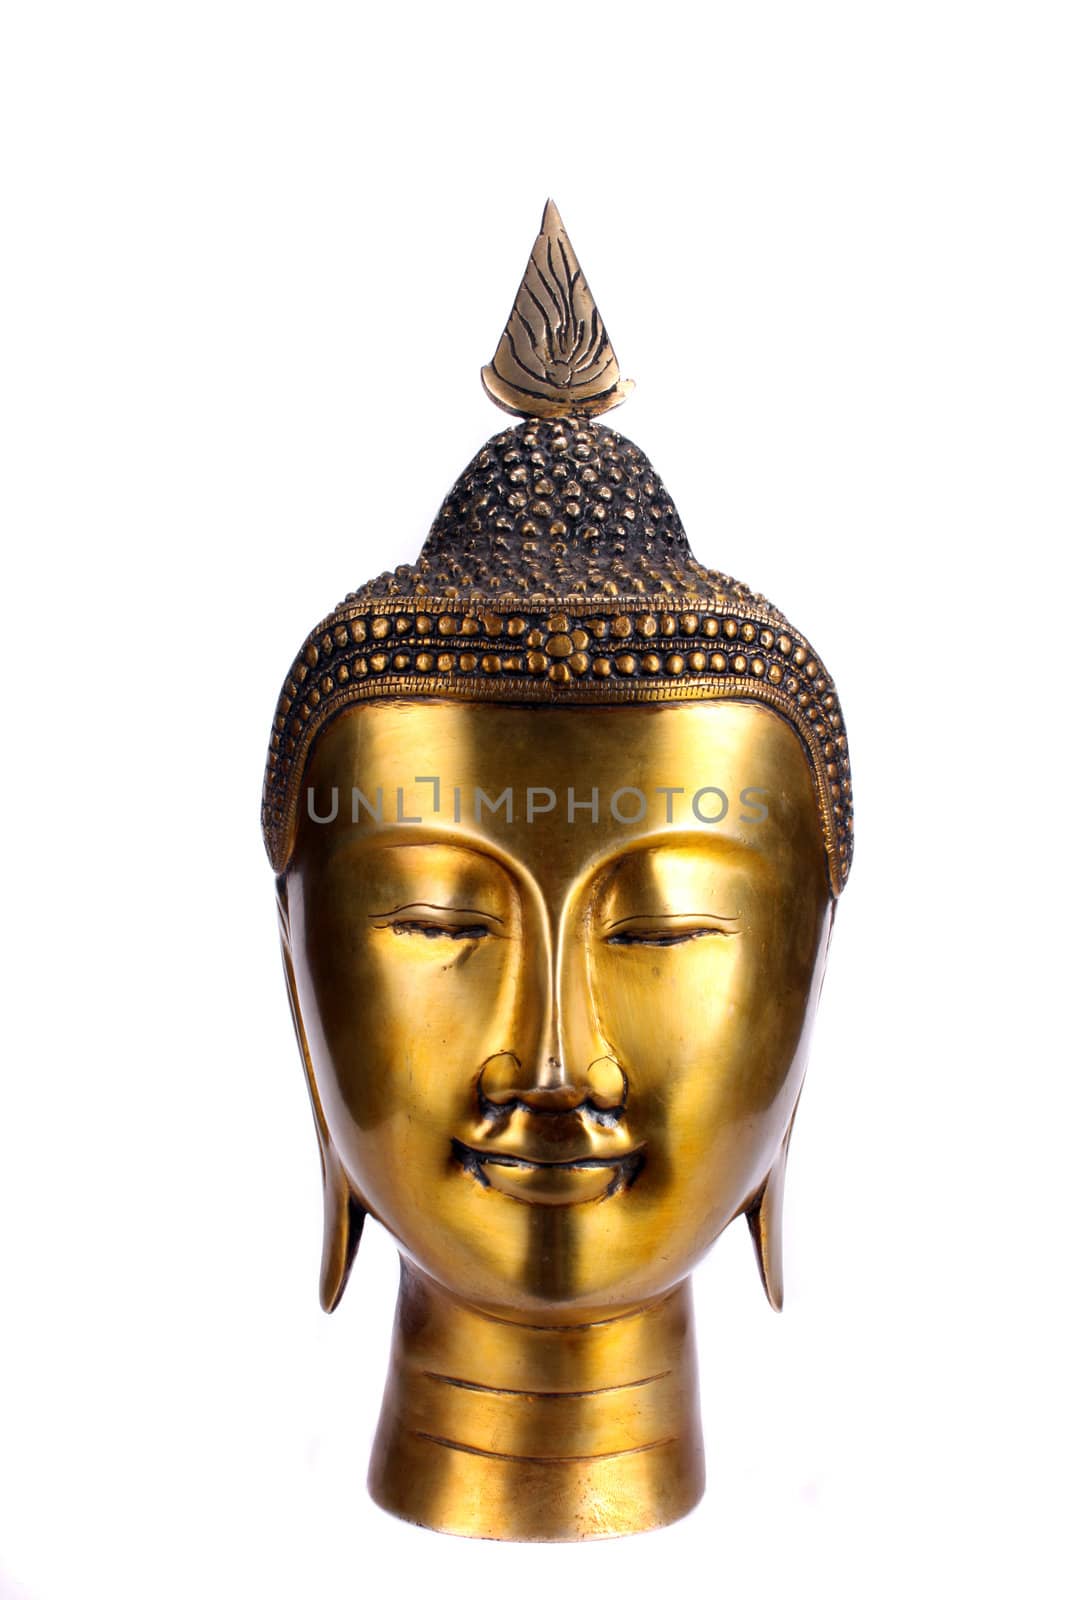 An antique metal sculpture of meditating Buddha, isolated on white studio background.